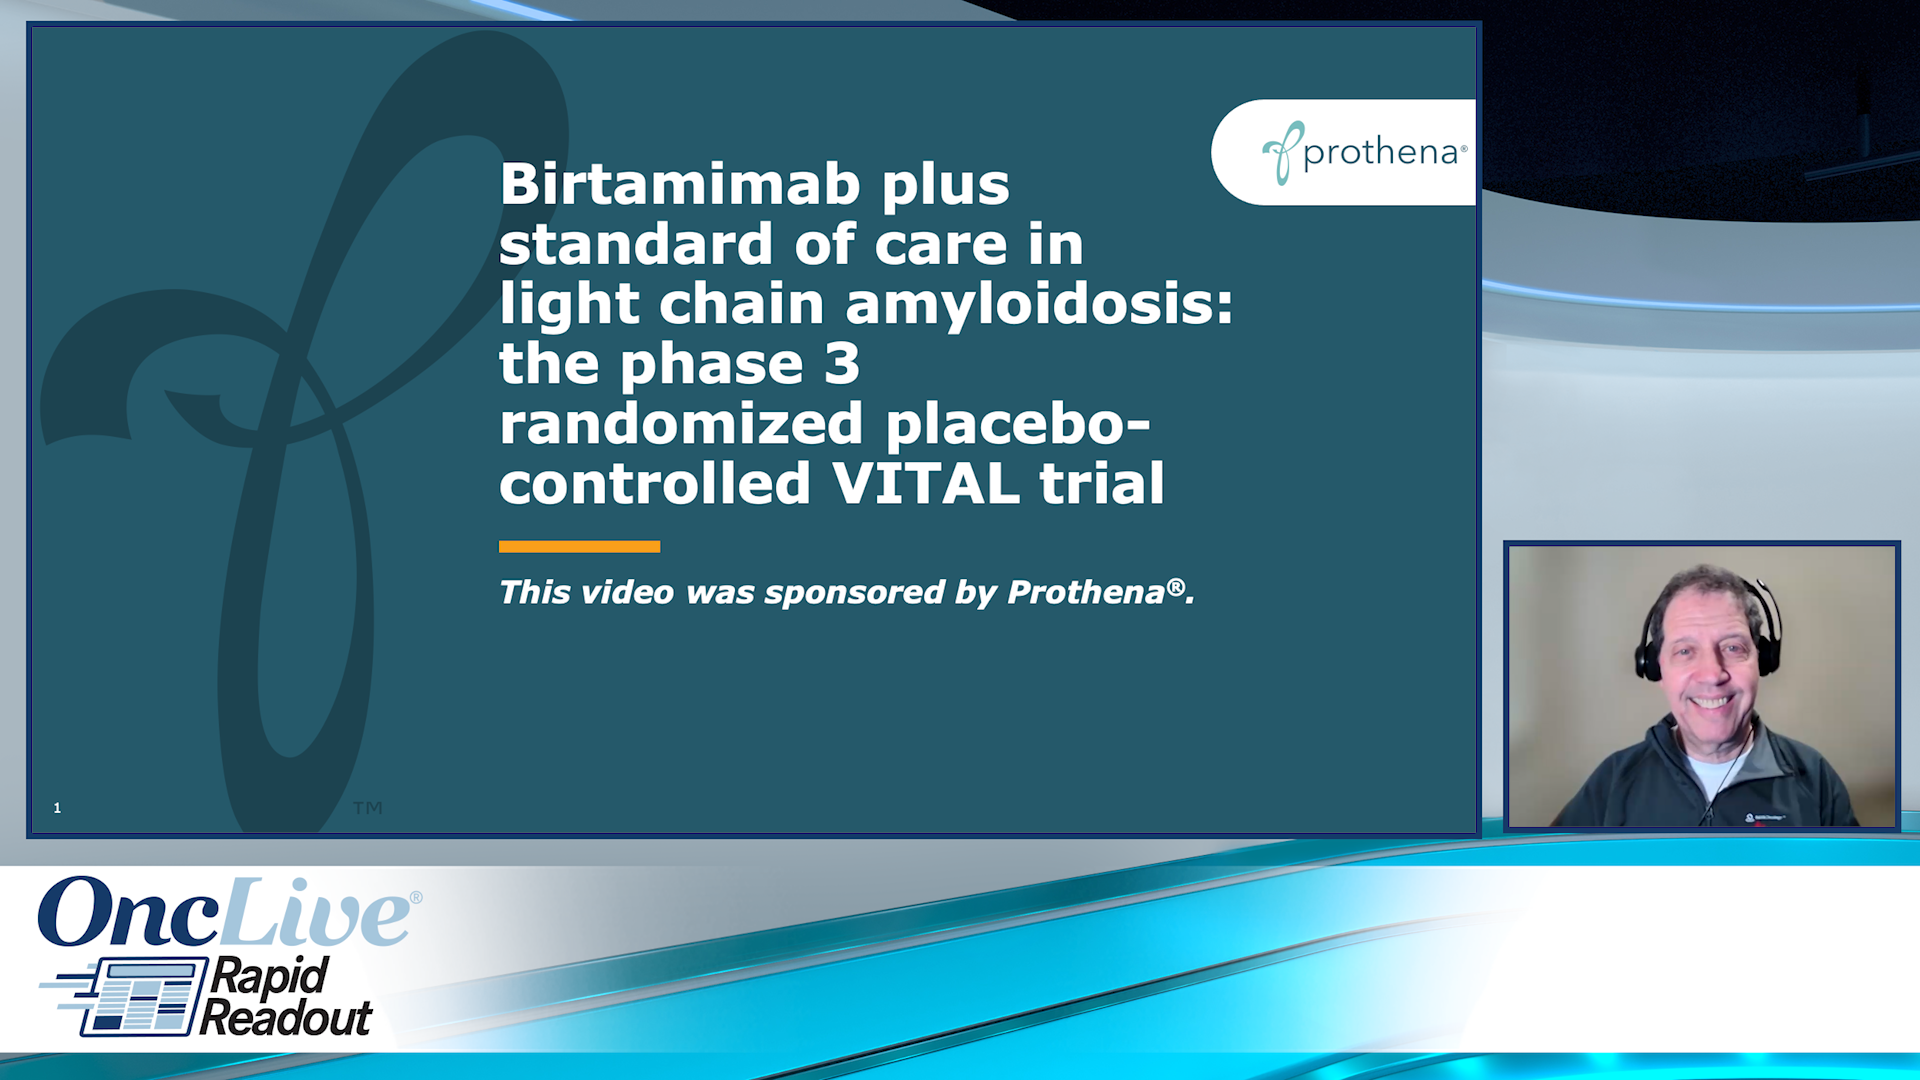 Birtamimab Plus Standard-Of-Care in Light Chain Amyloidosis: The Phase 3 Randomized, Placebo-Controlled VITAL Trial